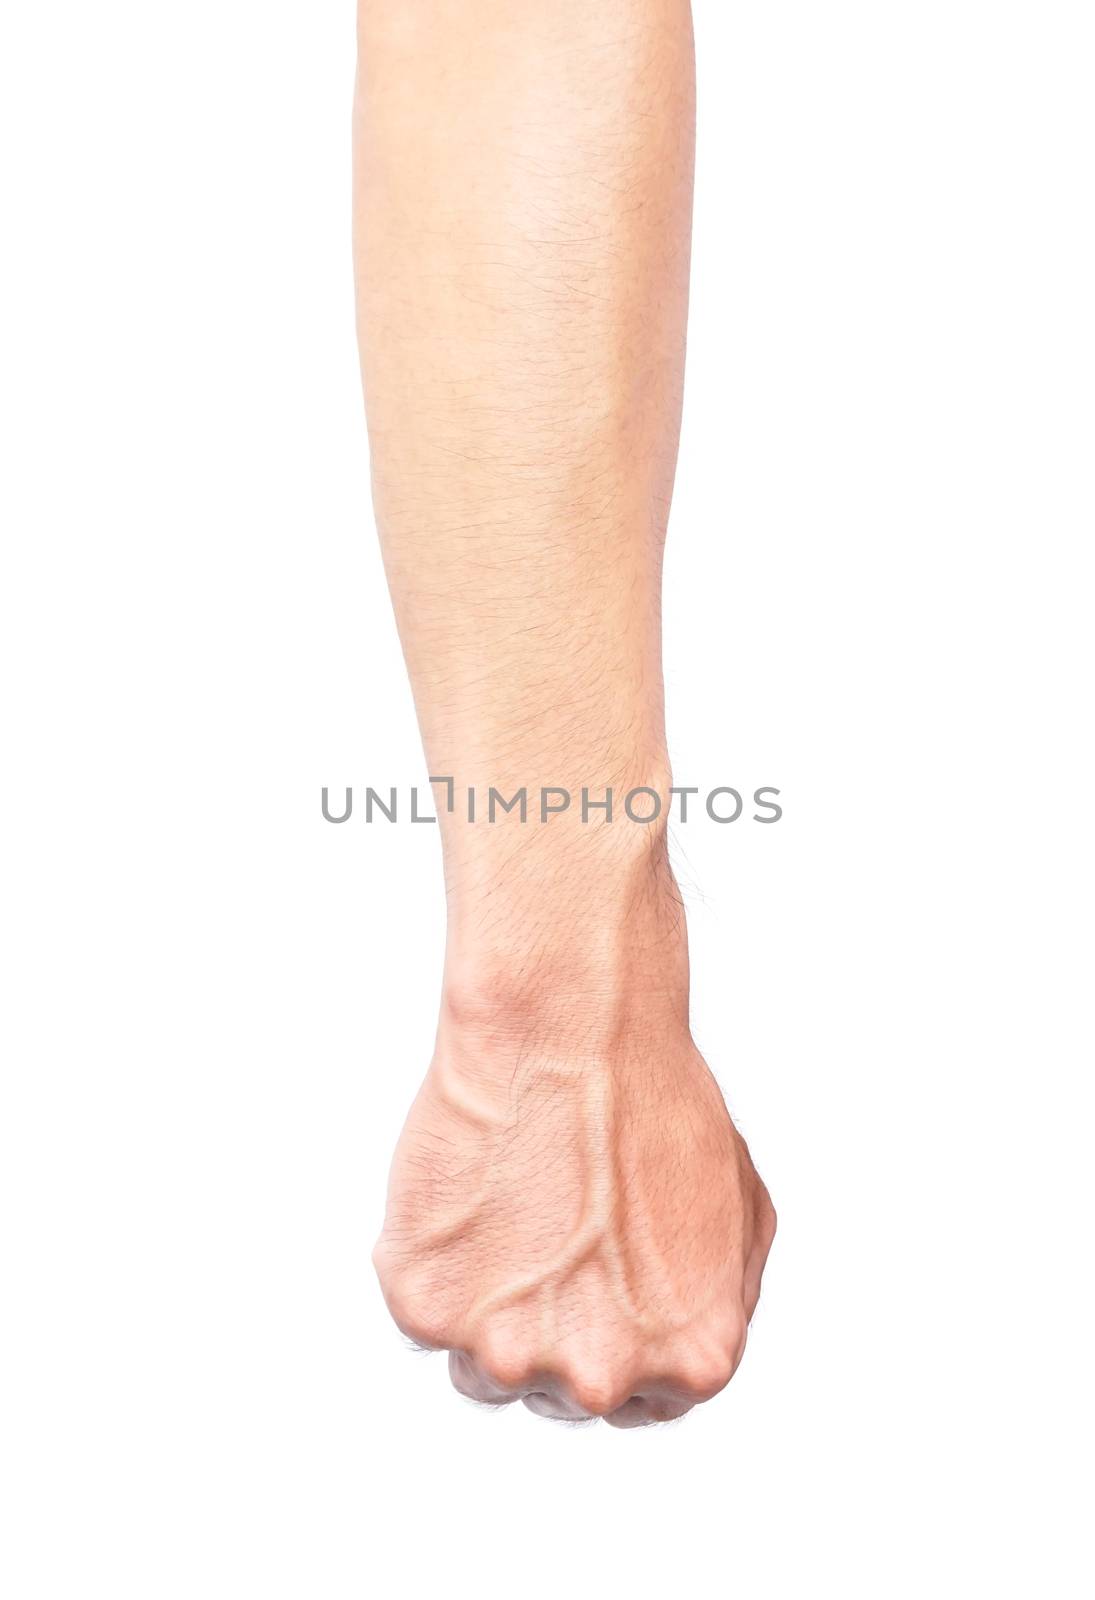 Man arm with blood veins on white background, health care and medical concept